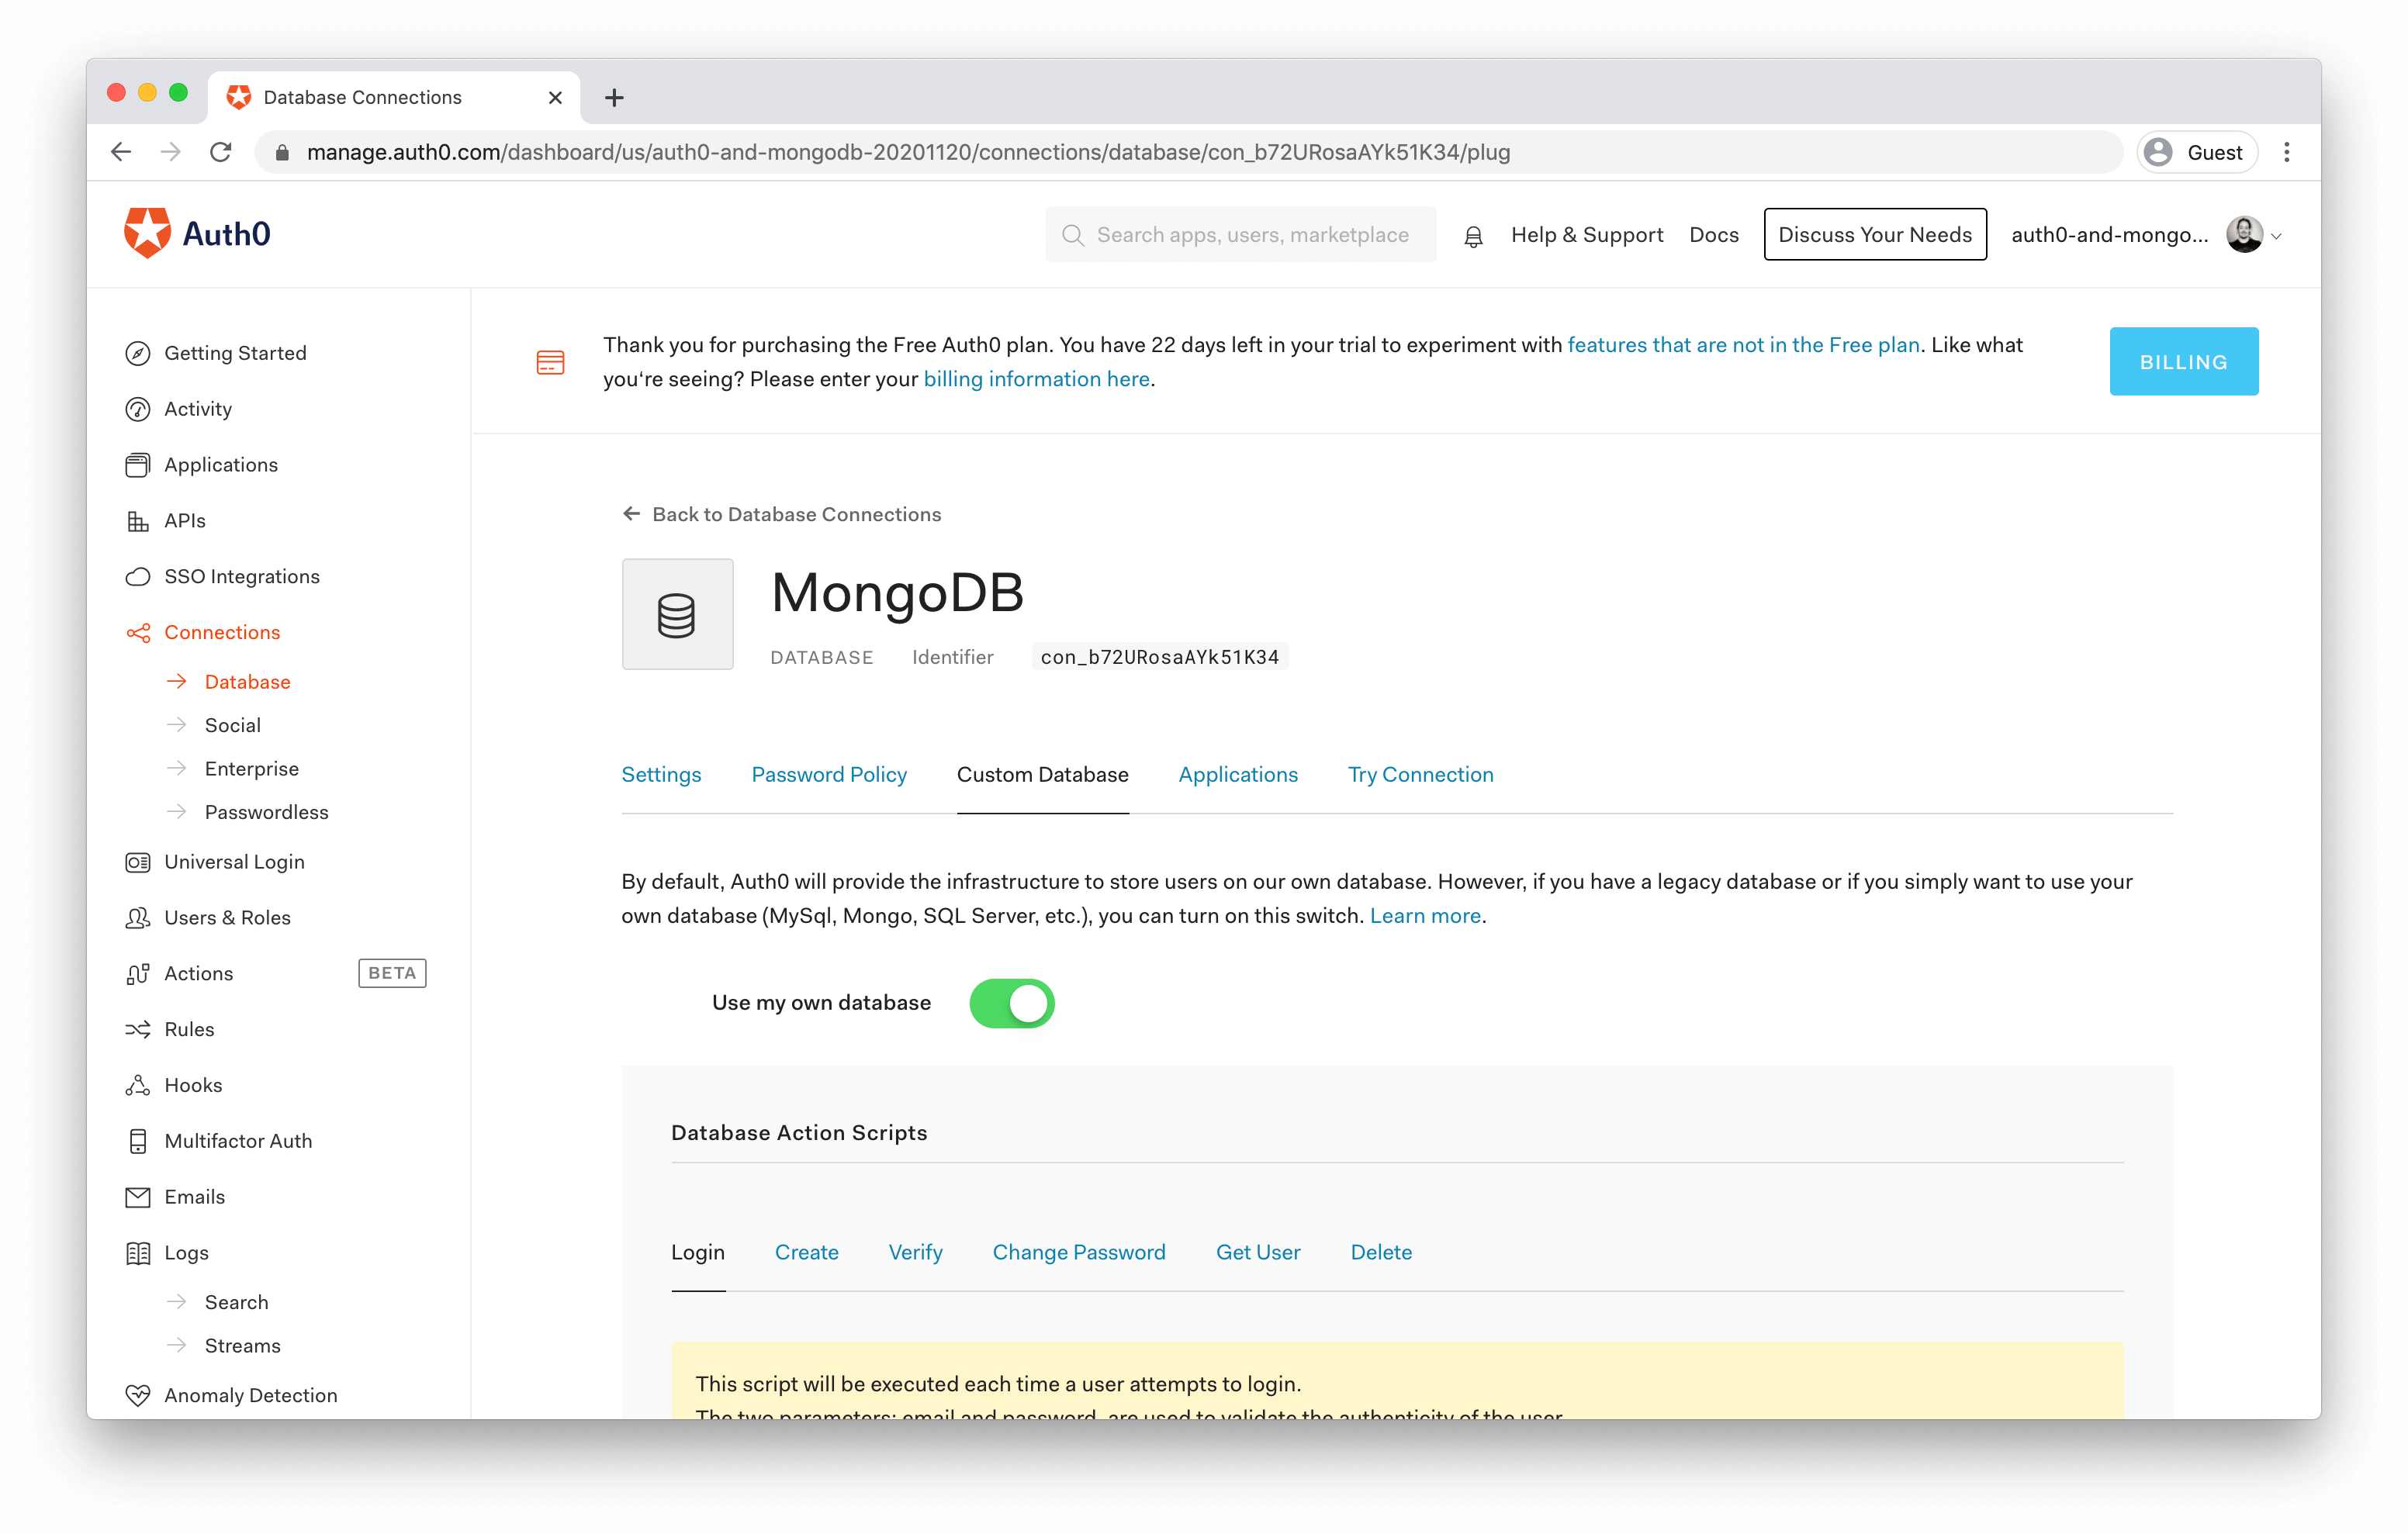 Creating a new Custom Database in Auth0